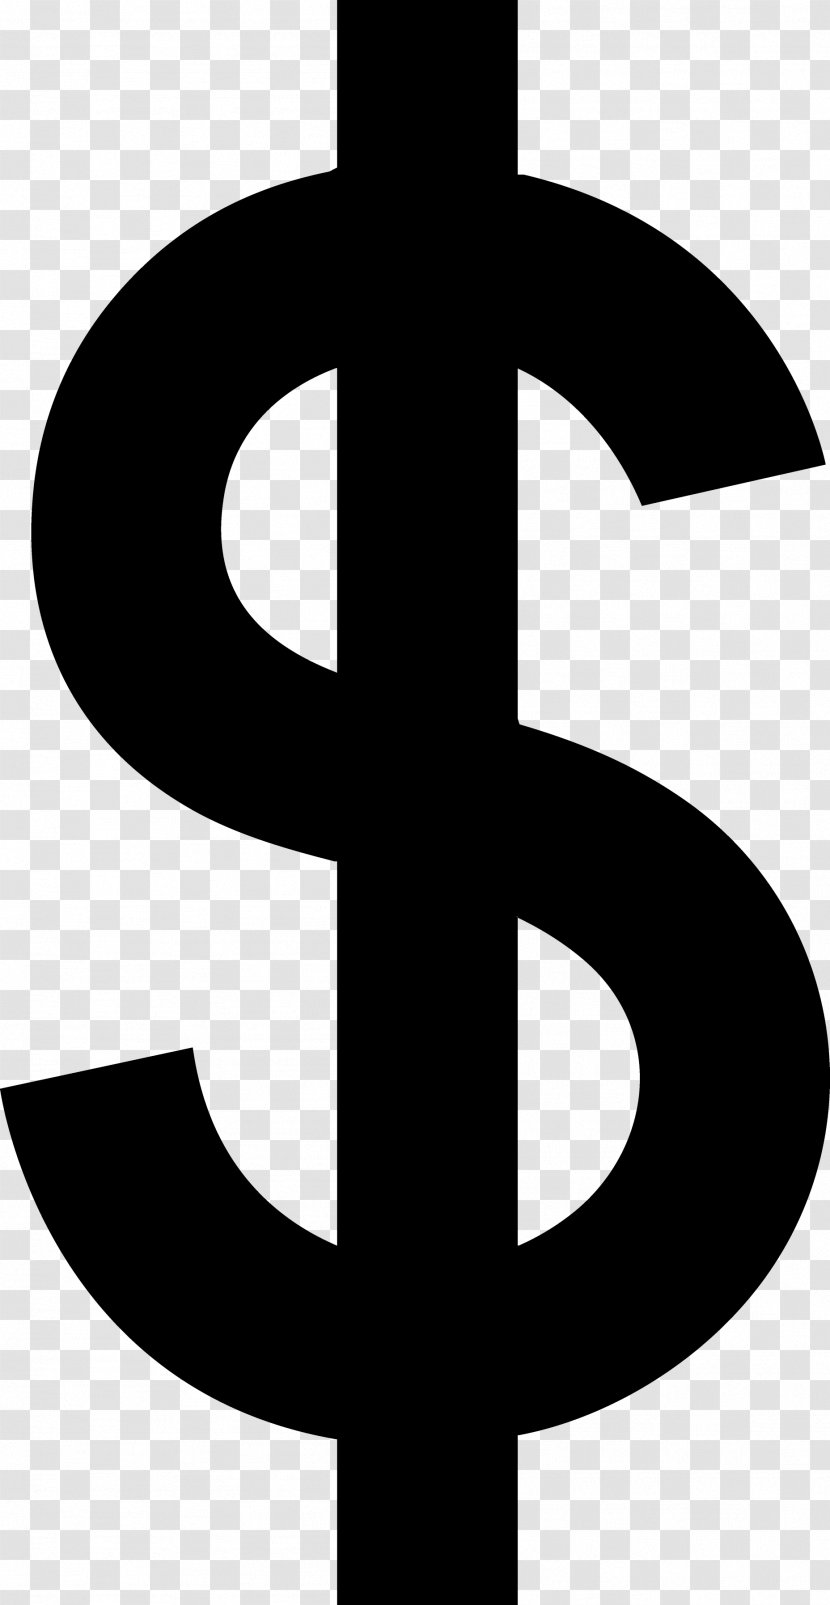 United States Dollar Sign Clip Art - Black And White Transparent PNG